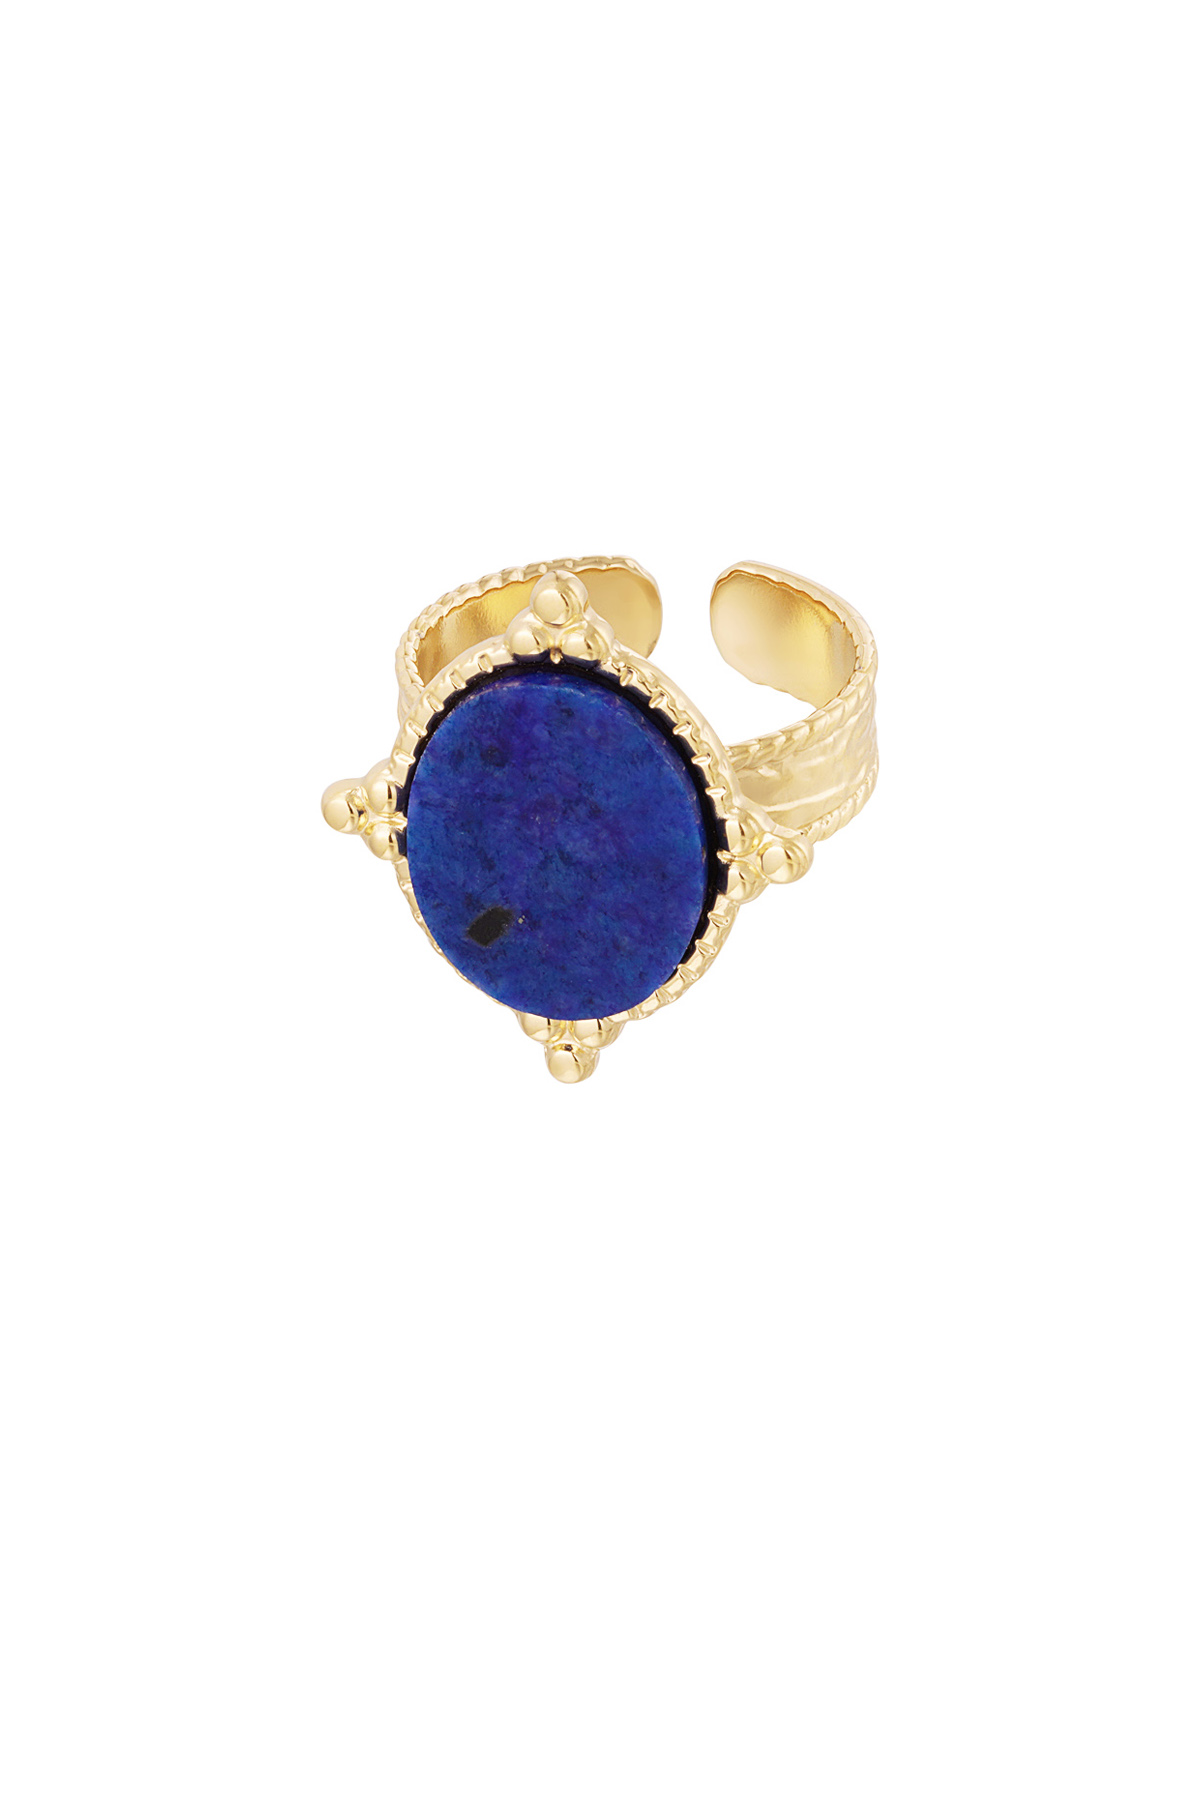 Ring stone with decoration - gold/blue